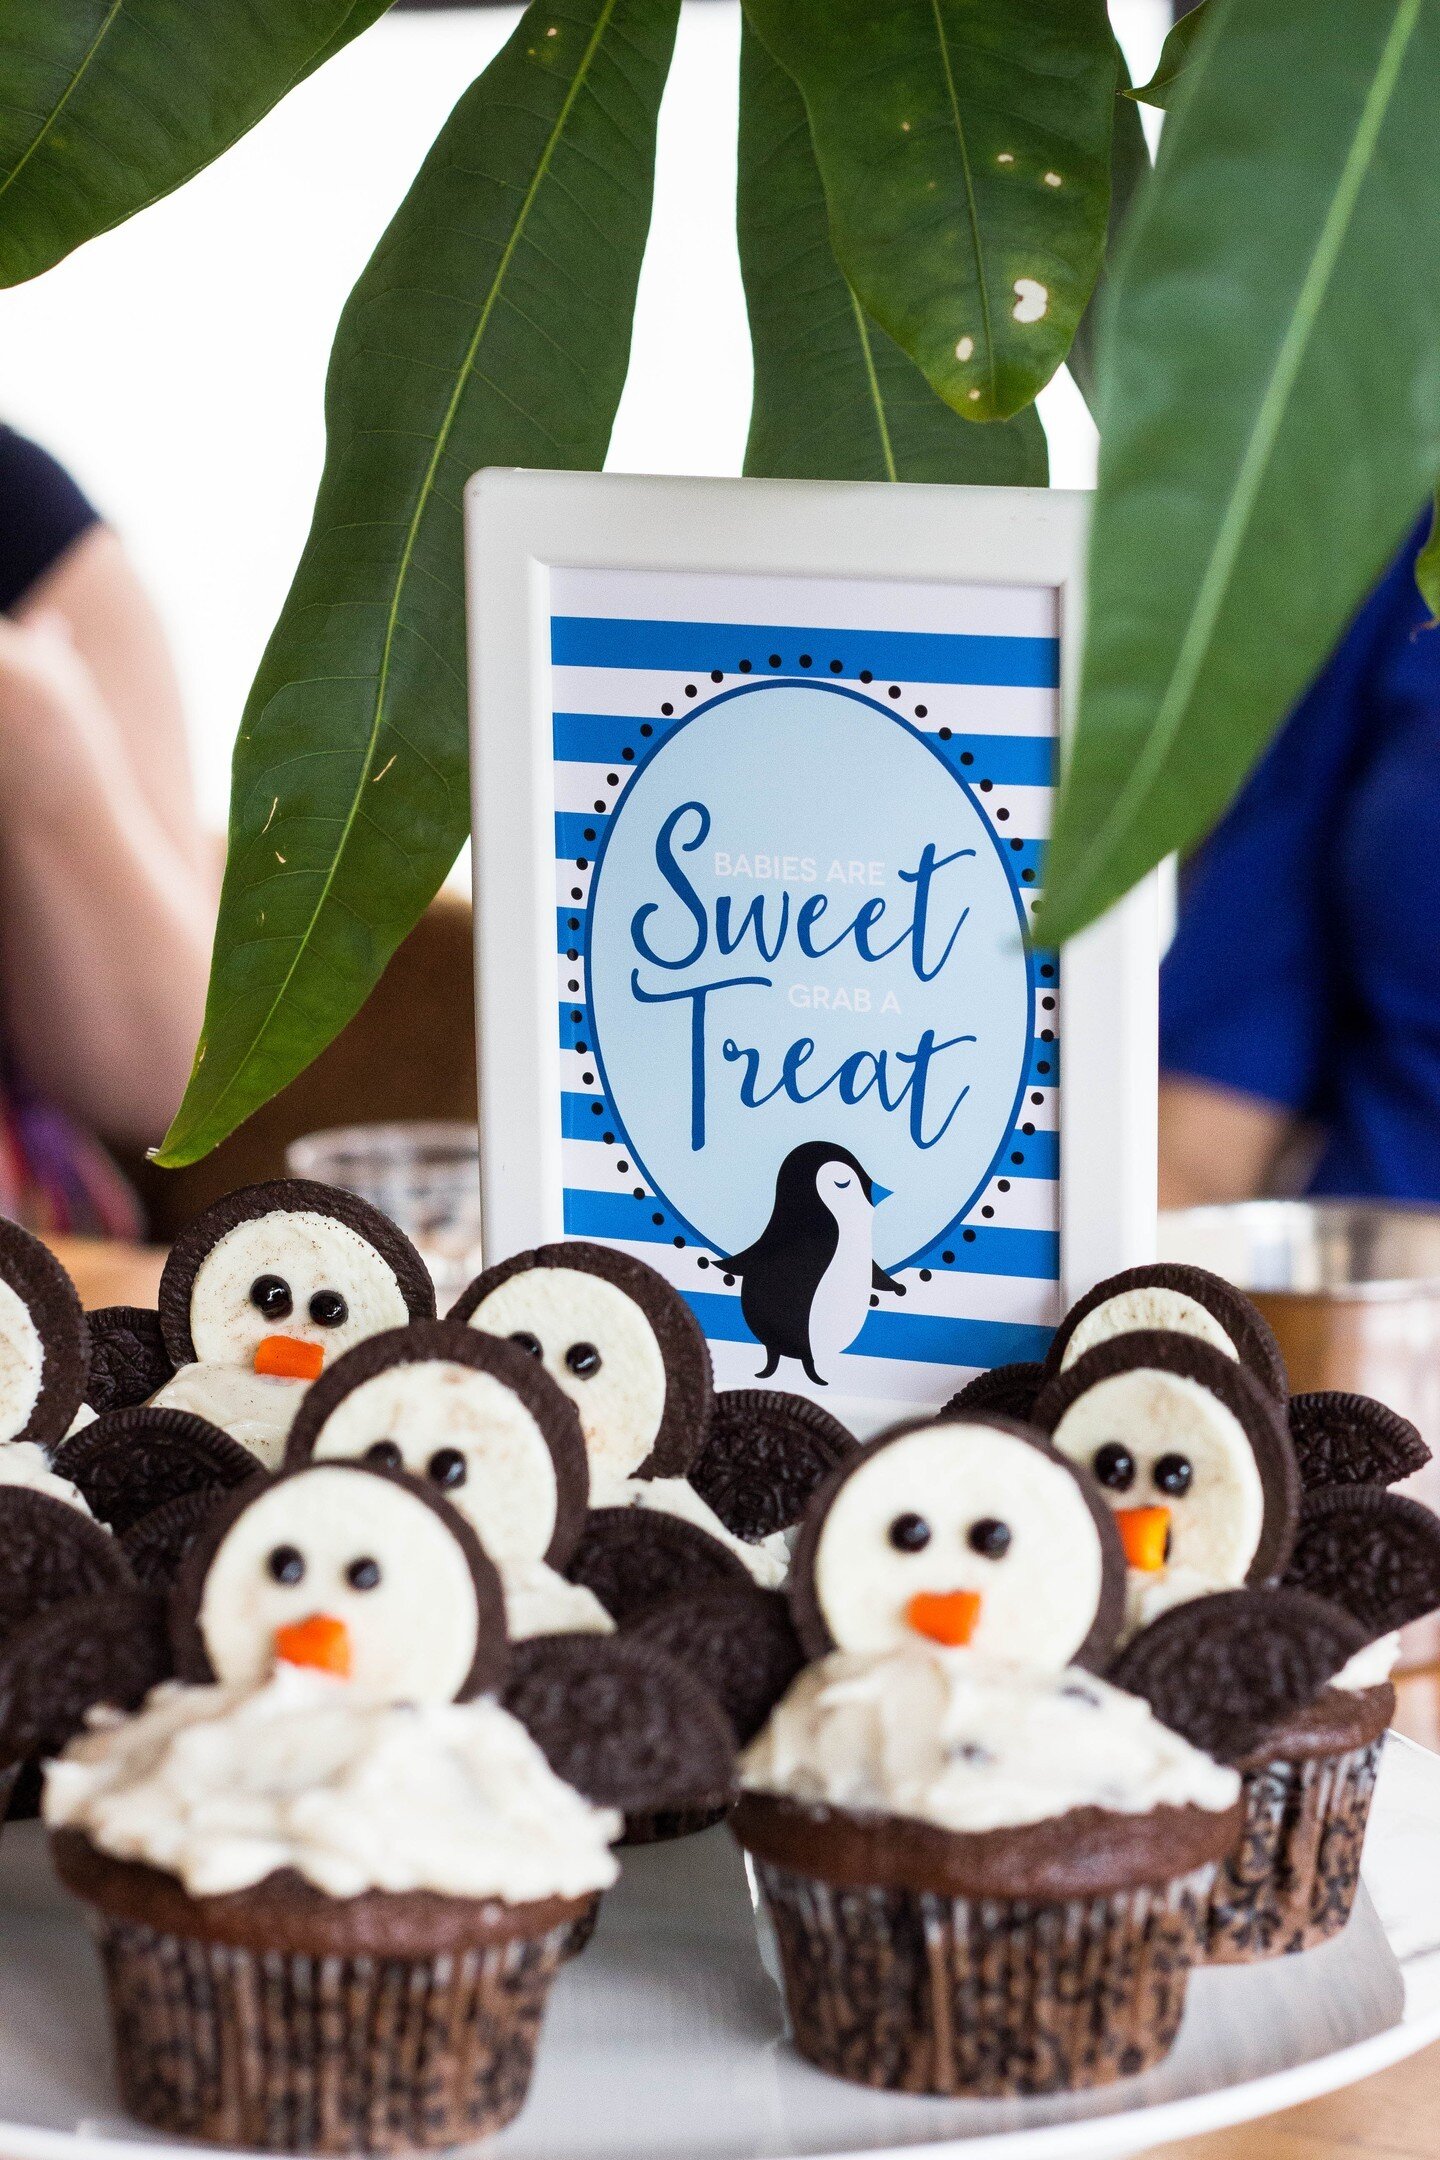 It may be summer, but these little 🐧 penguins 🐧 are burning up on Pinterest 🌟🔥 These guys are our most popular pin right now, so I take it some of ya'll are looking to cool off. You can find a tutorial and more inspo on our blog! 

✨🖥️ We're als